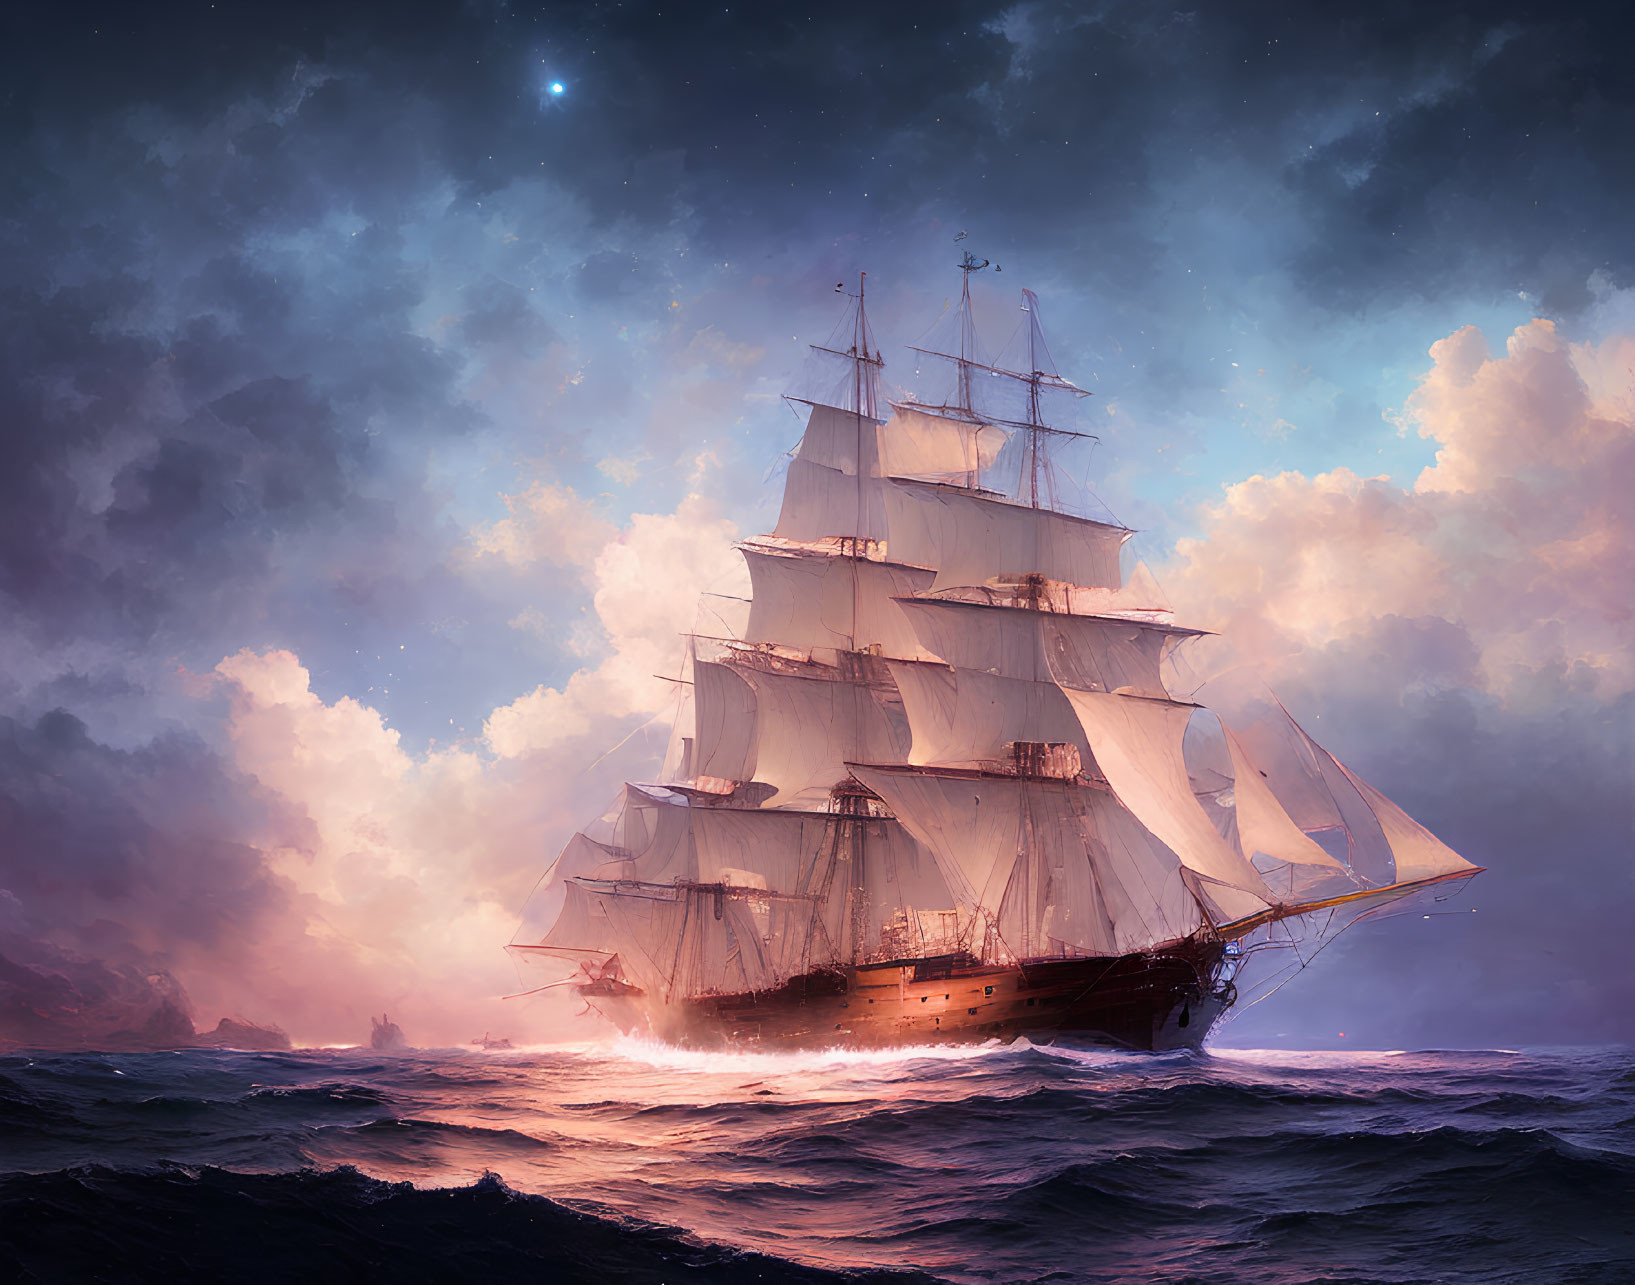 Majestic sailing ship in turbulent seas under pink and purple sky